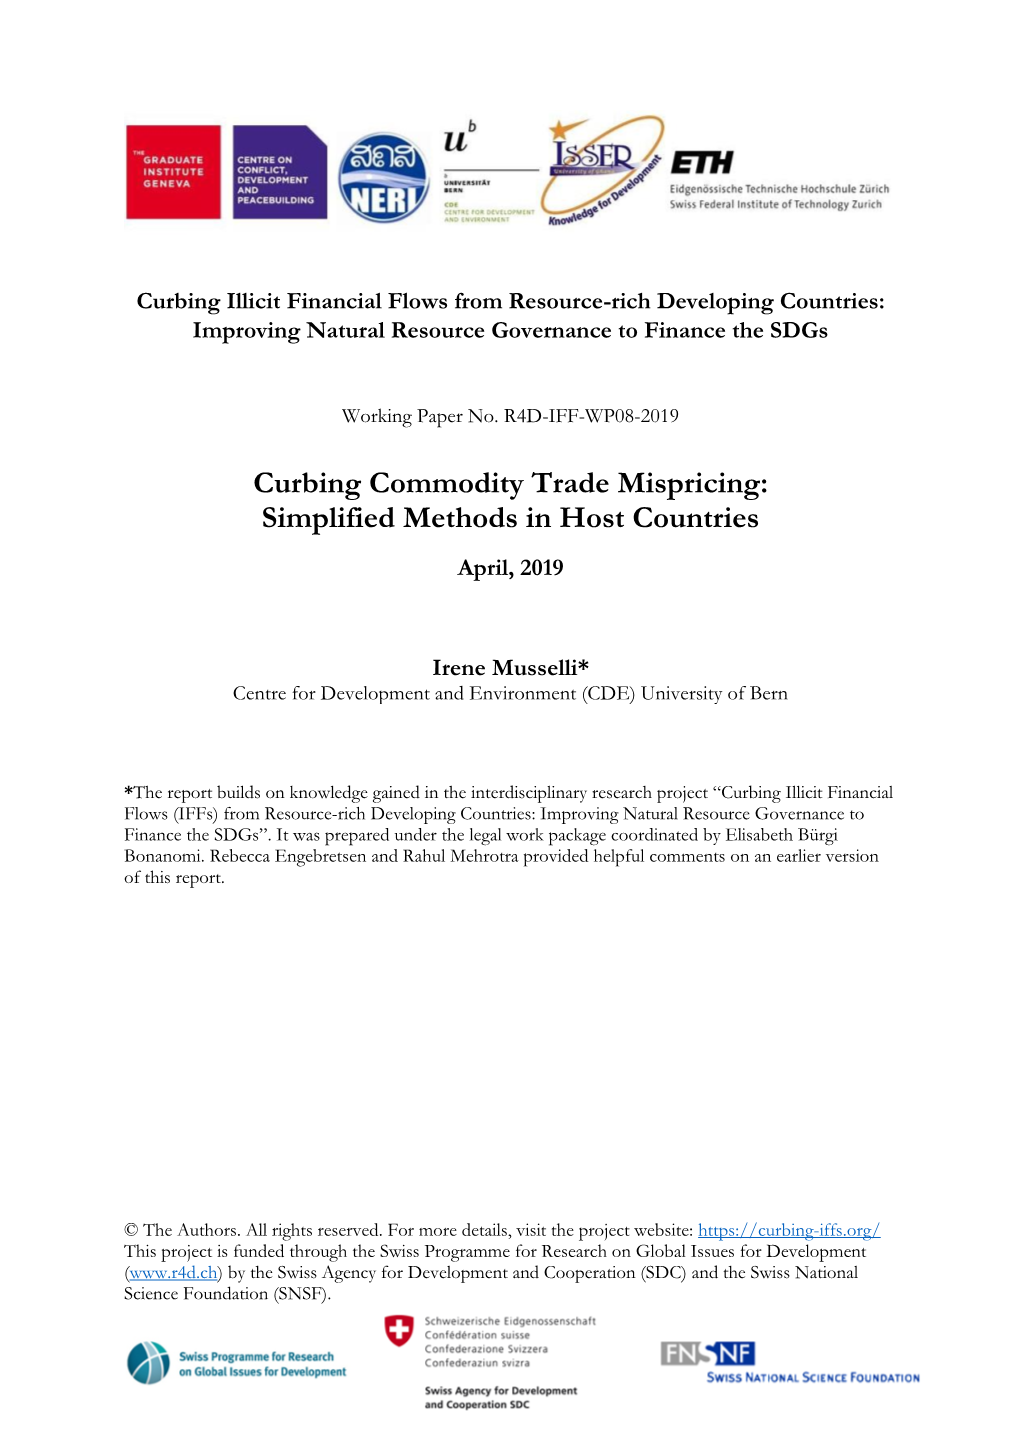 Curbing Commodity Trade Mispricing: Simplified Methods in Host Countries